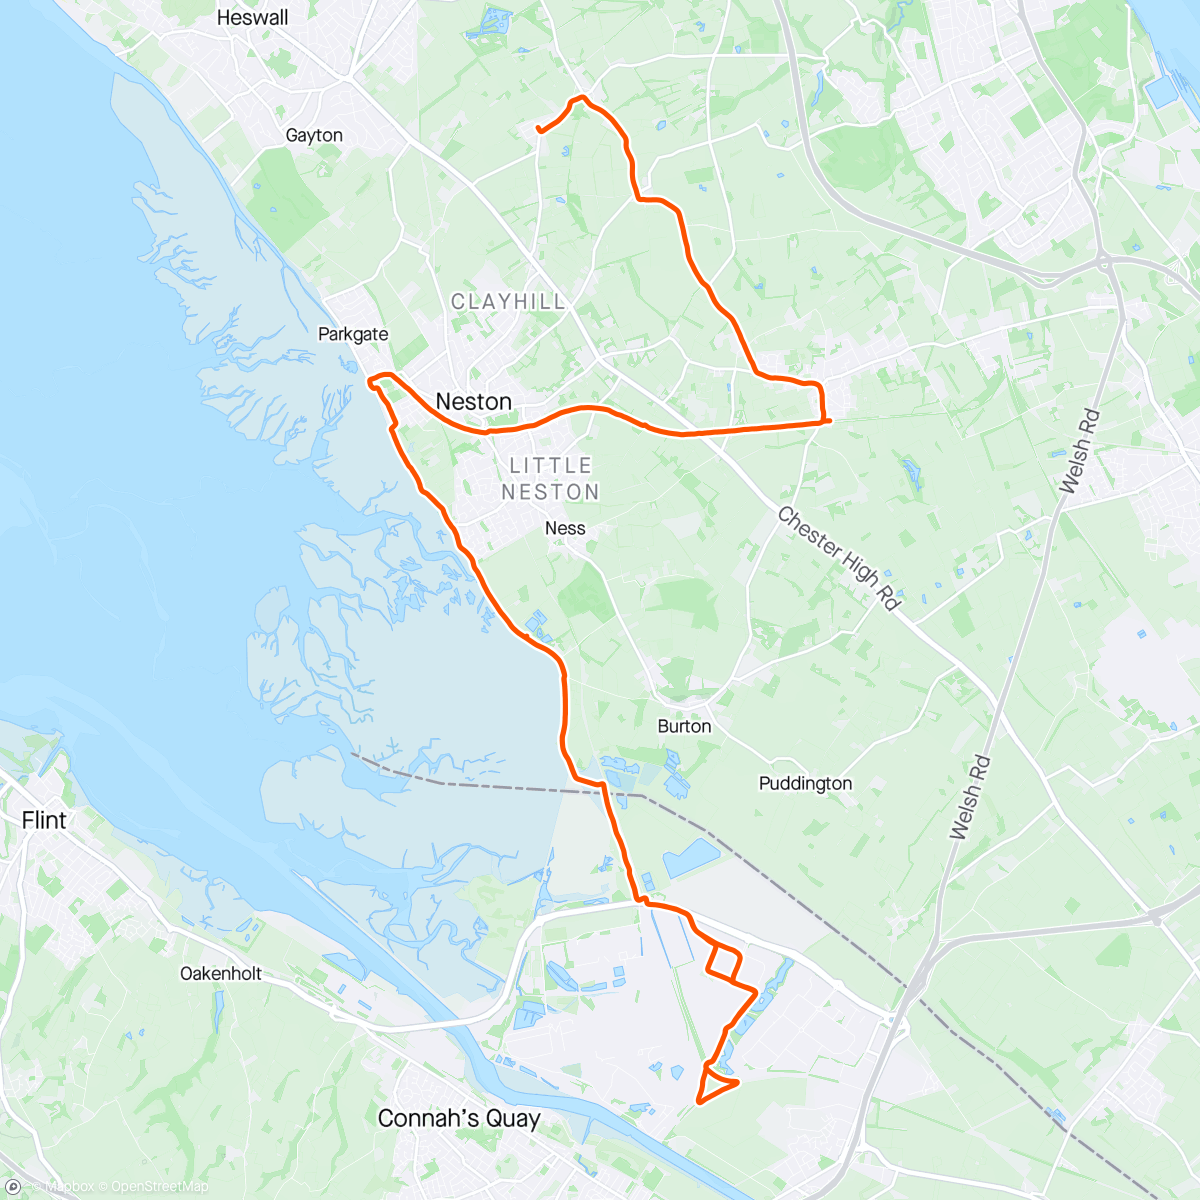 Карта физической активности (30k planned and done - a run of 3 parts - to Hadlow to meet Jules and Sarah, then to Net’s to meet the Teamies then a last brutal 15k 😭)